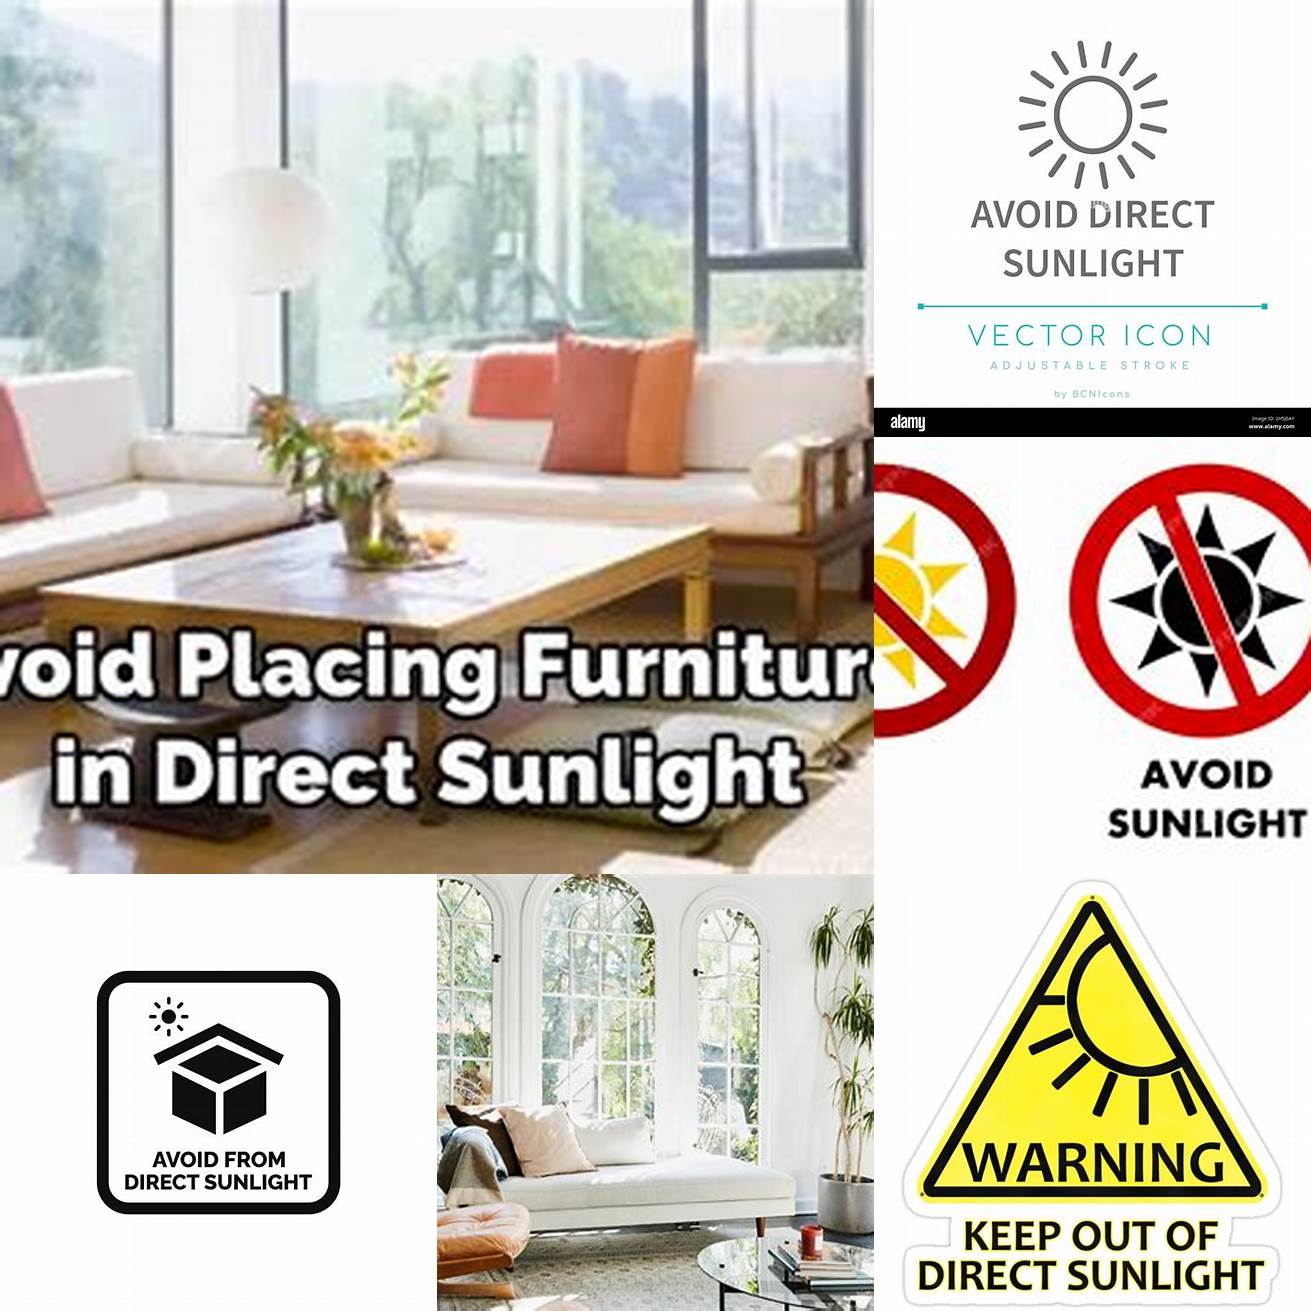 Avoid placing furniture in direct sunlight